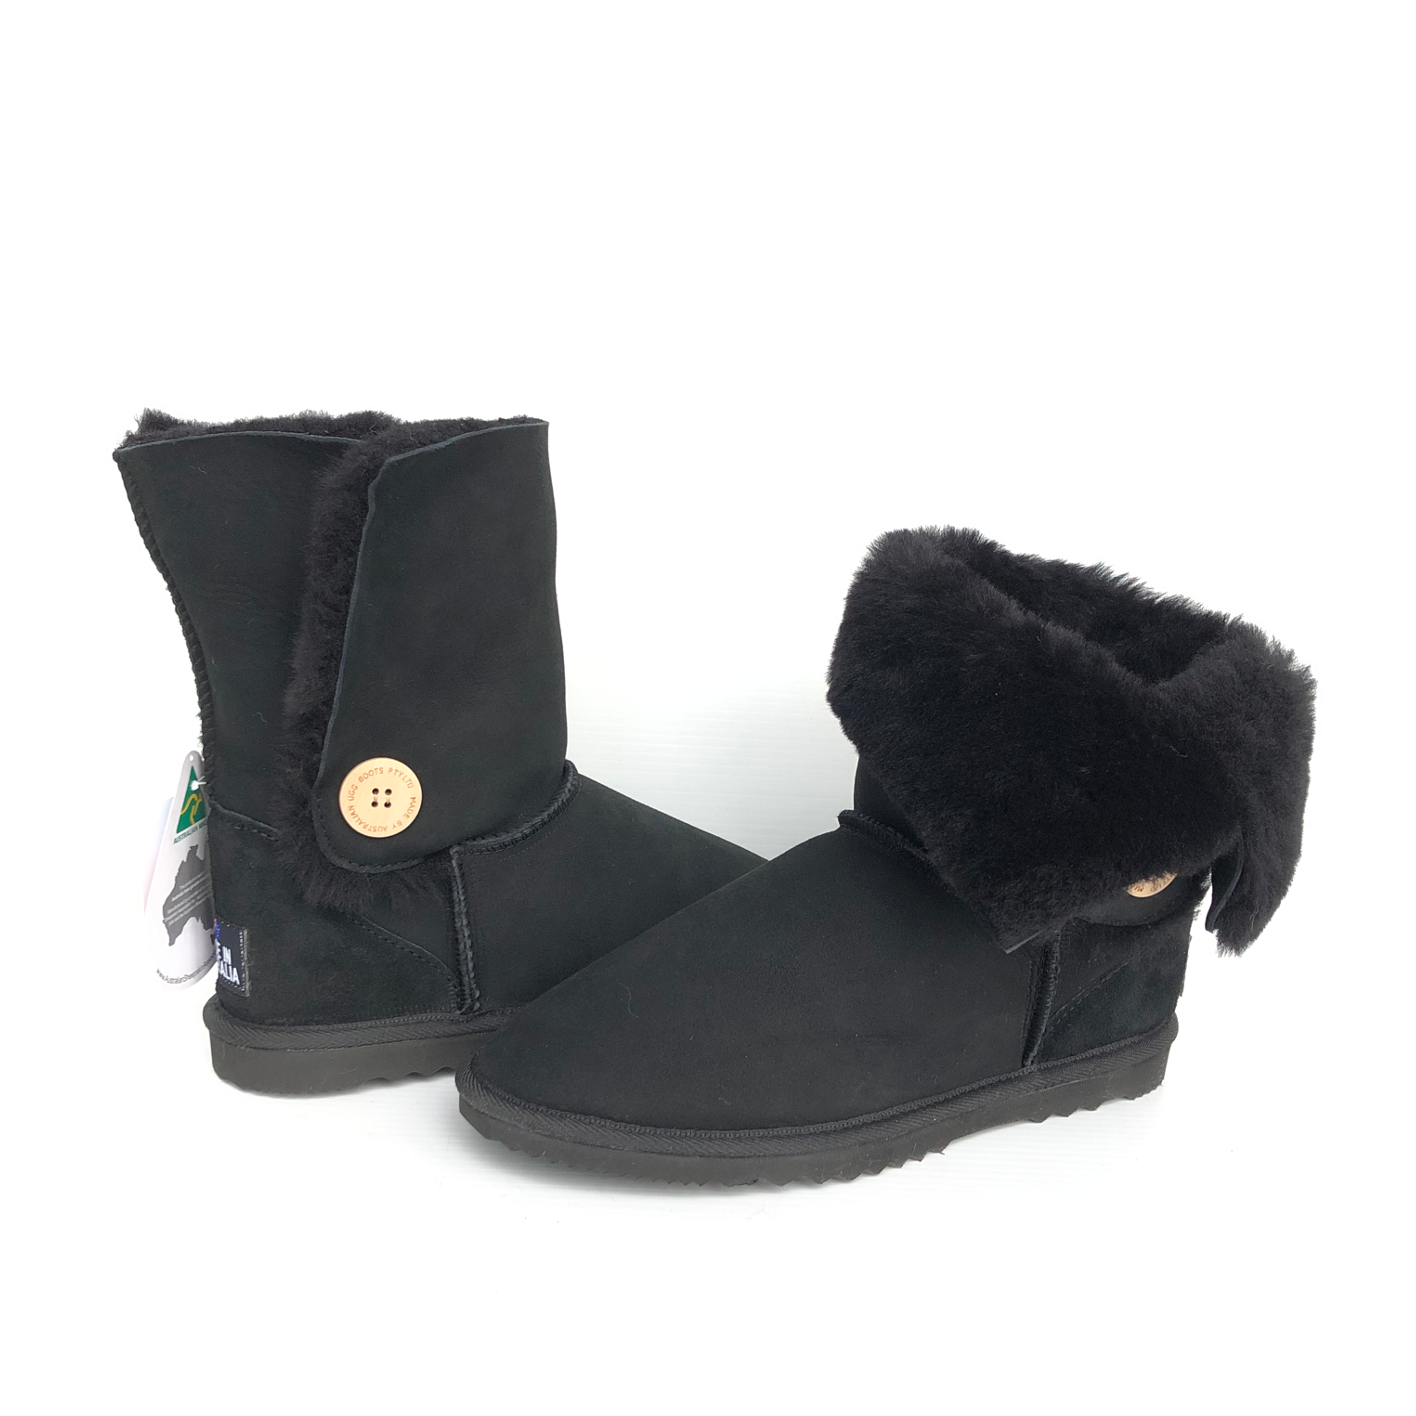 Short black ugg boots with side button and black sheepskin spillage from the top